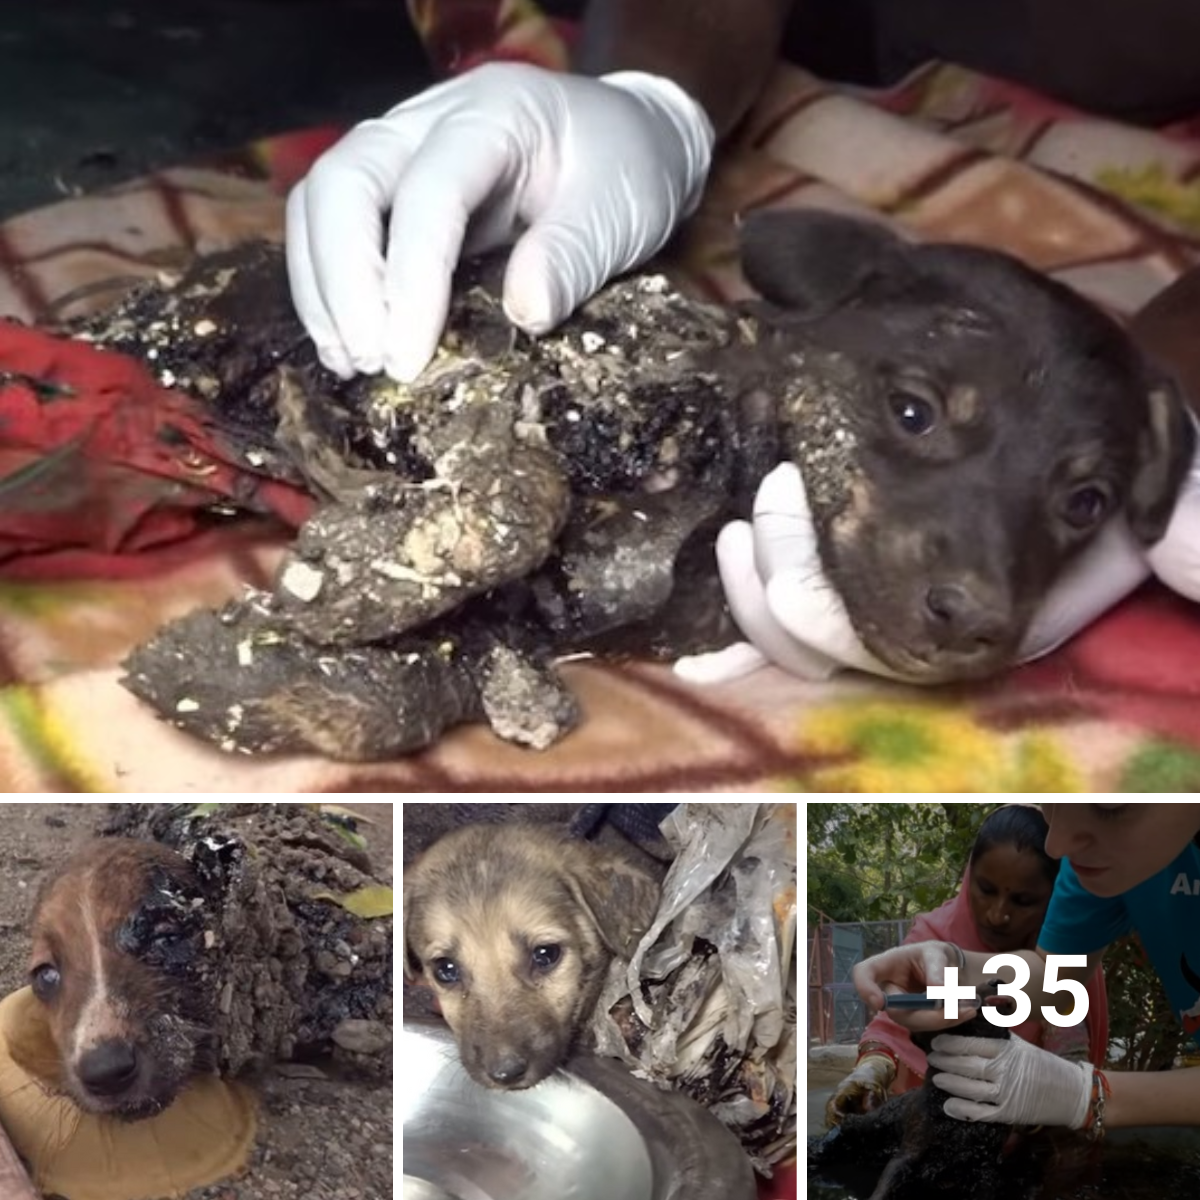 The horrifying situation of hungry, injured, malnourished dogs on a paved road